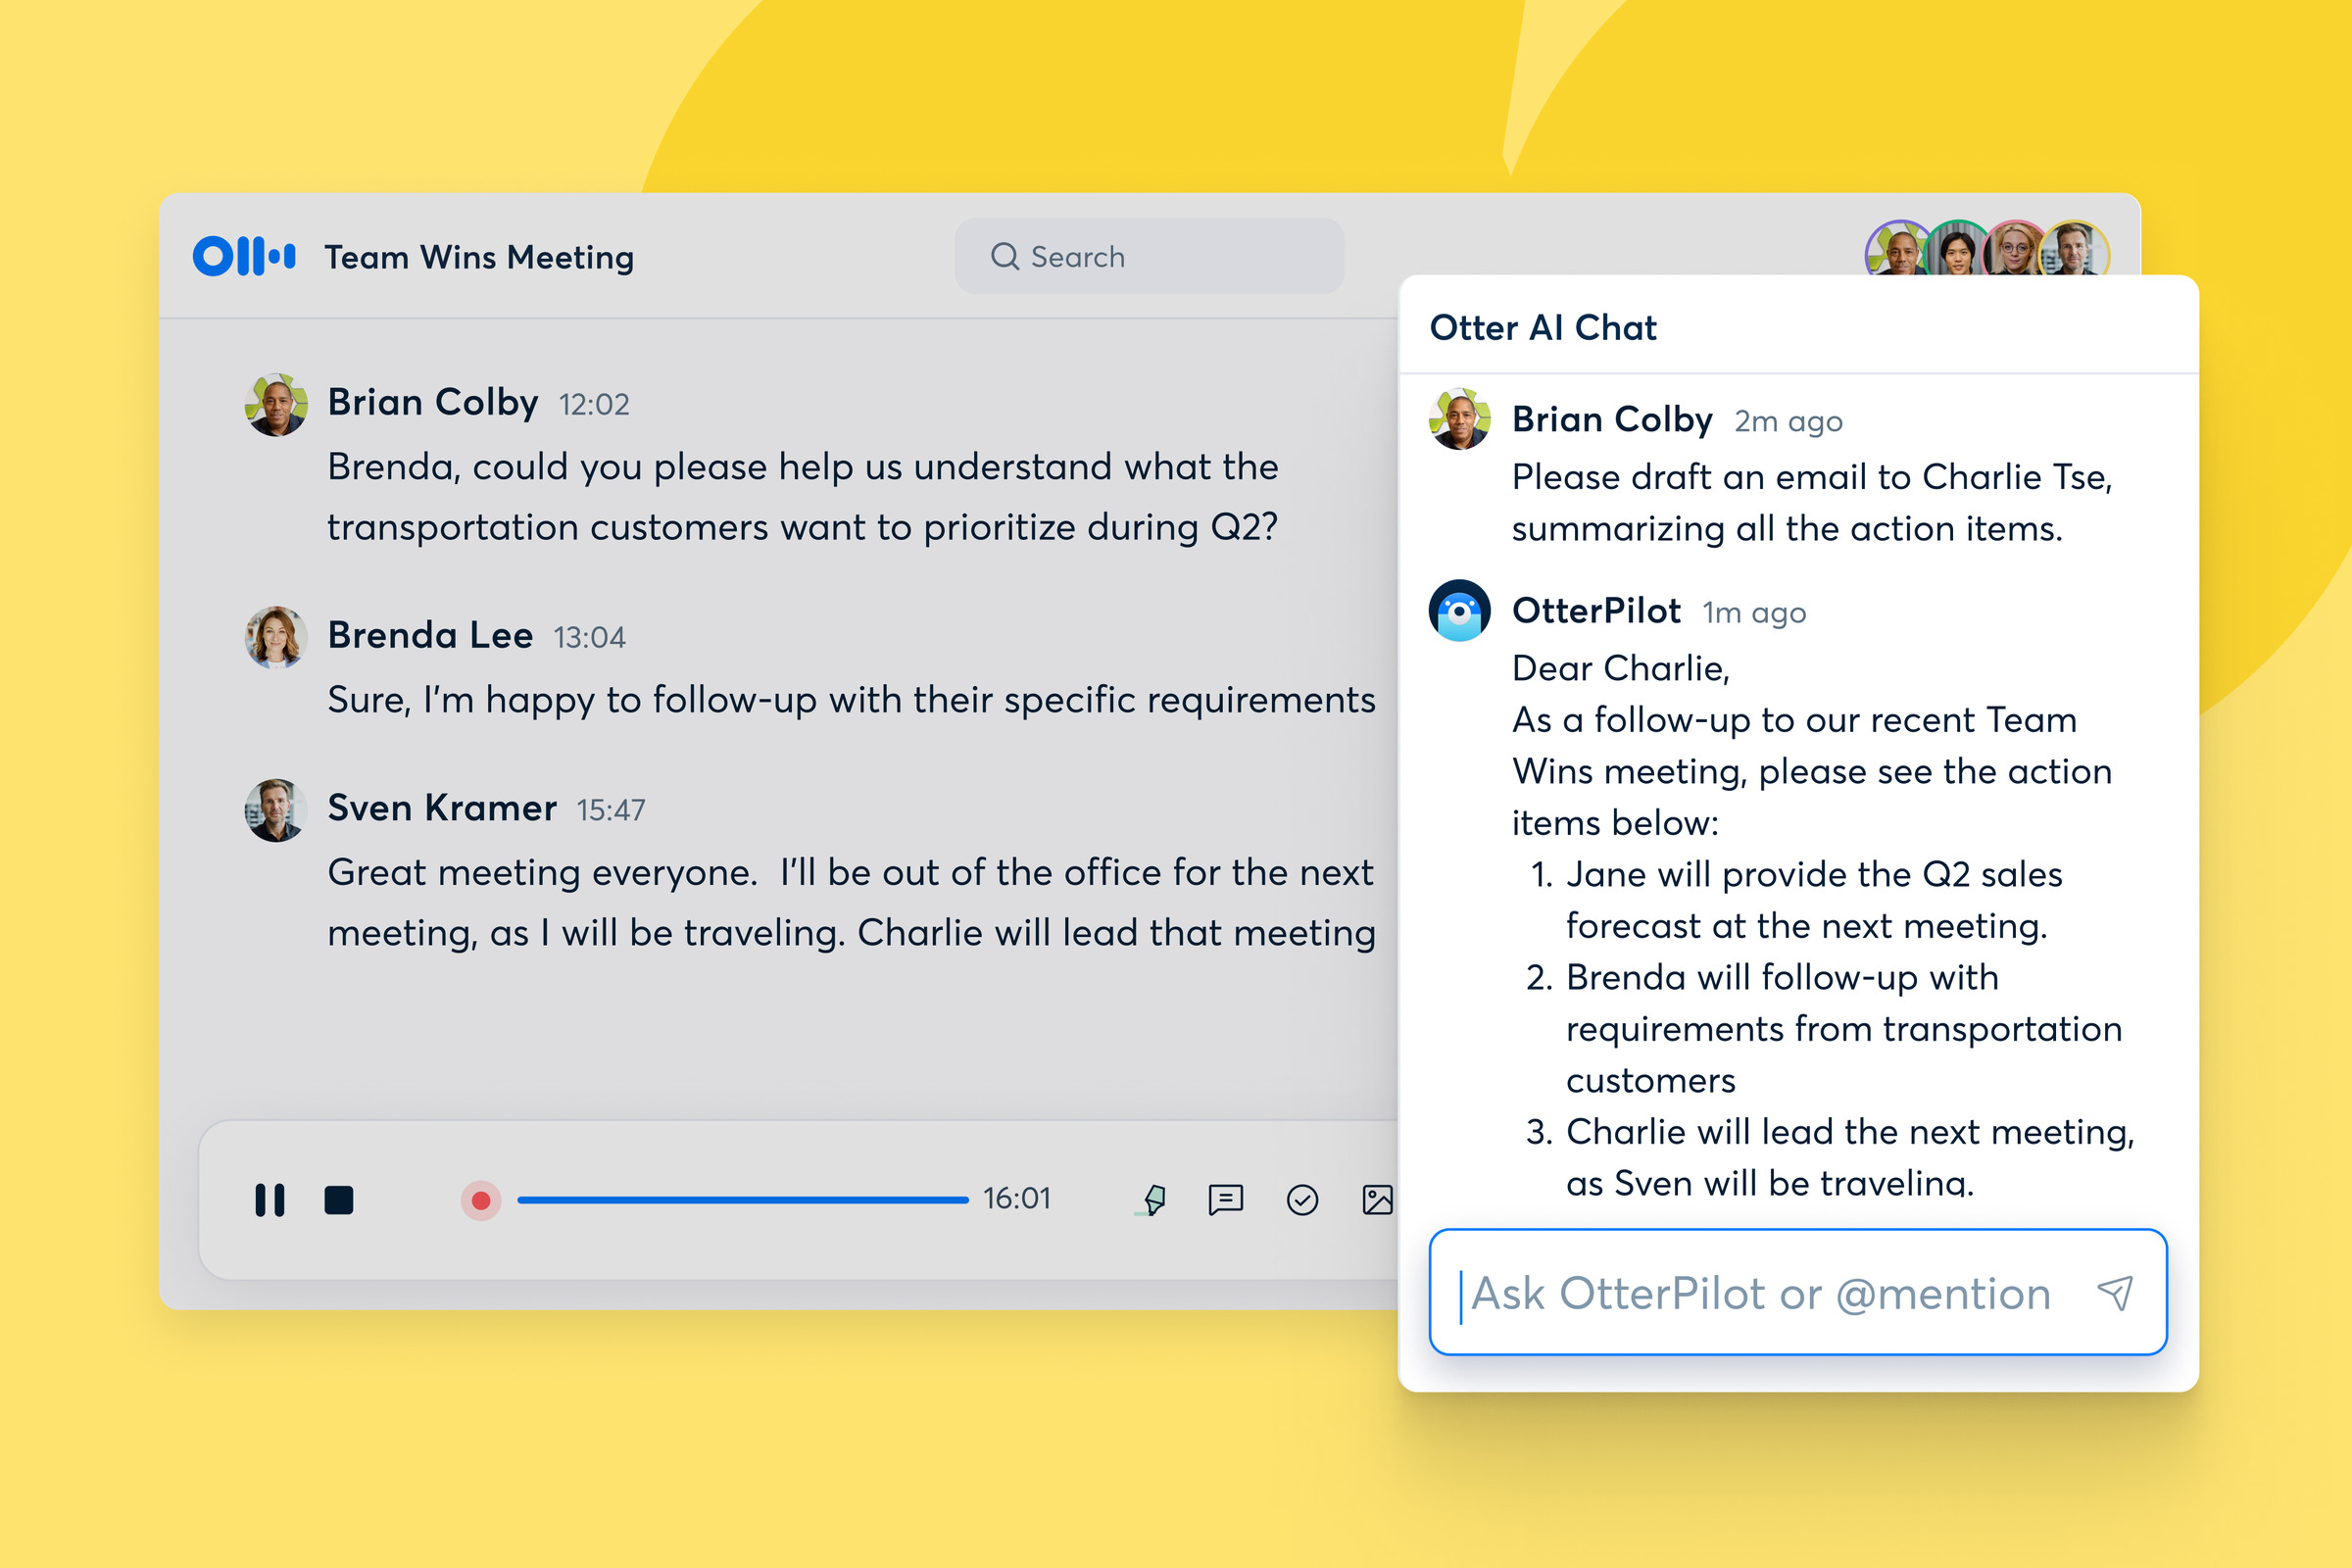 A screenshot of the Otter Chat AI features being used to generate email copy based on information from a meeting it attended.